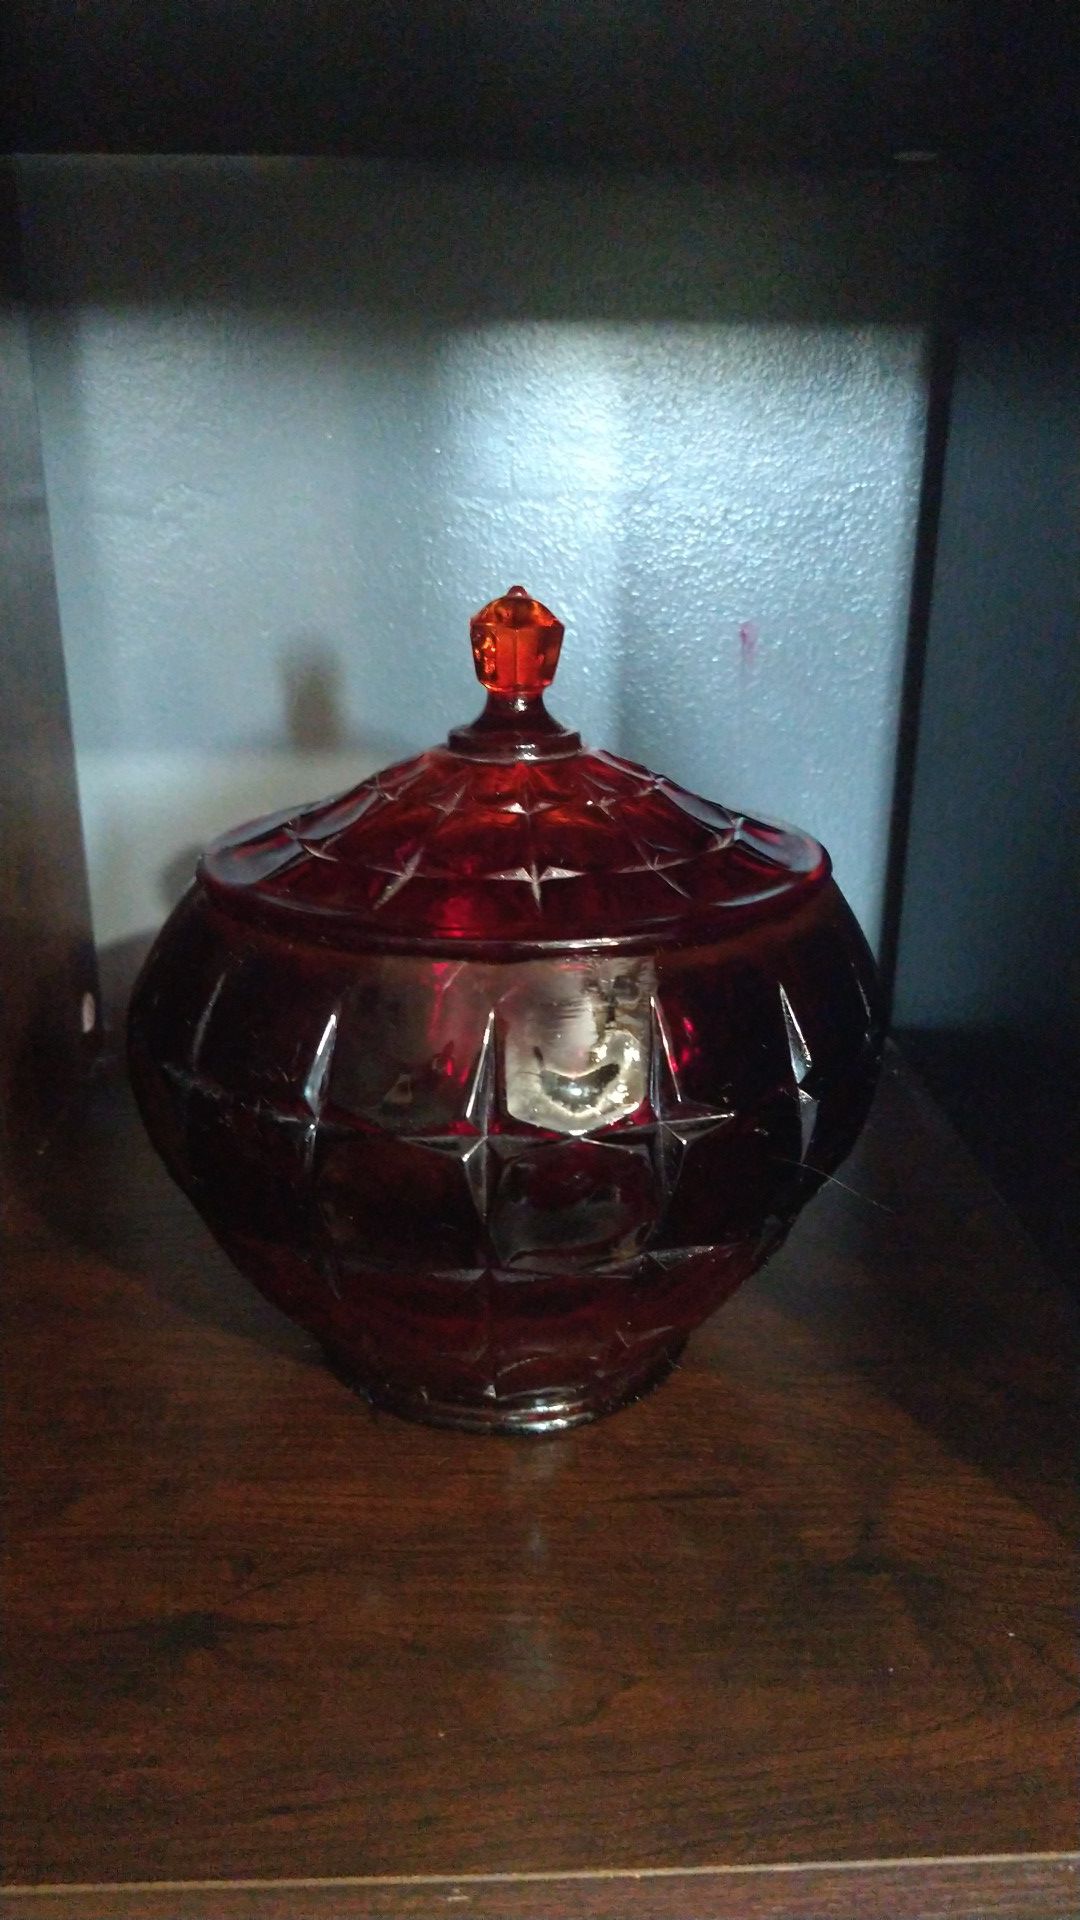 Red glass candy dish with lid